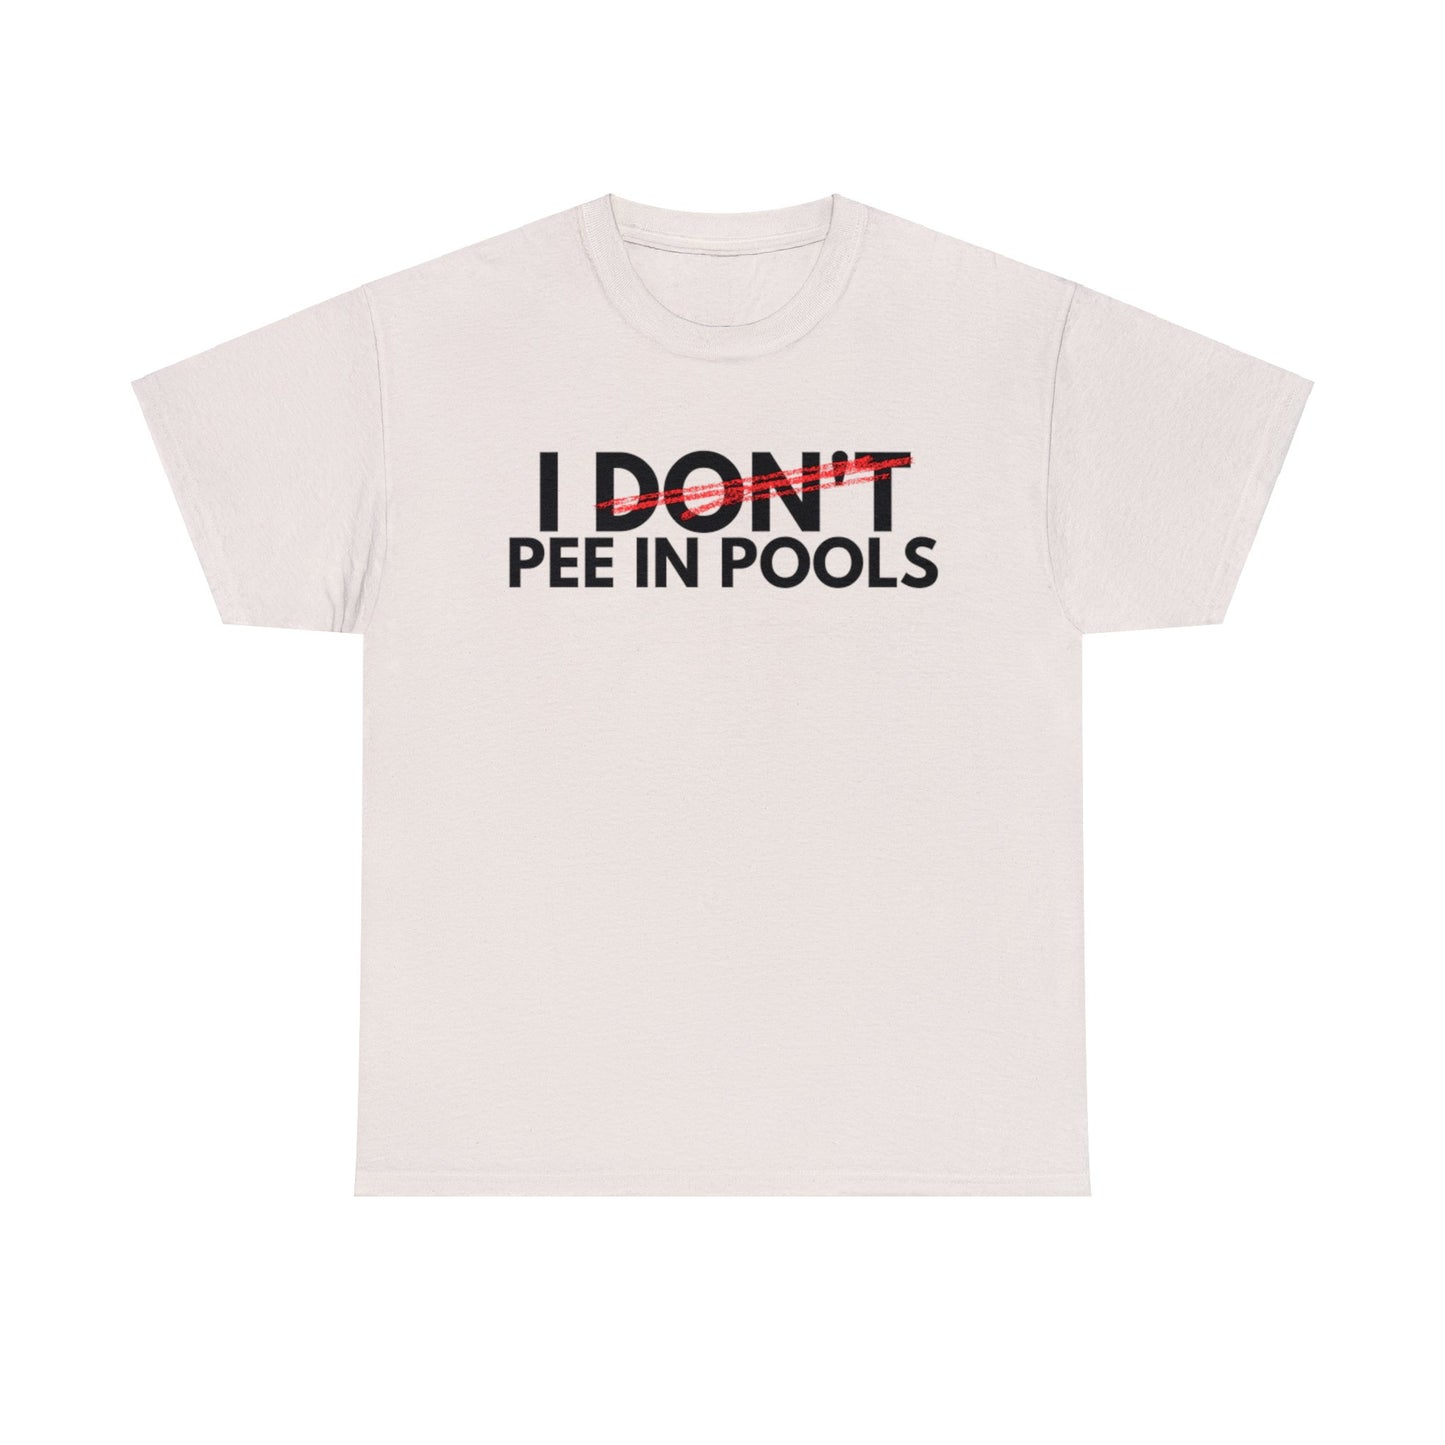 I (Don't) Pee In Pools Tee